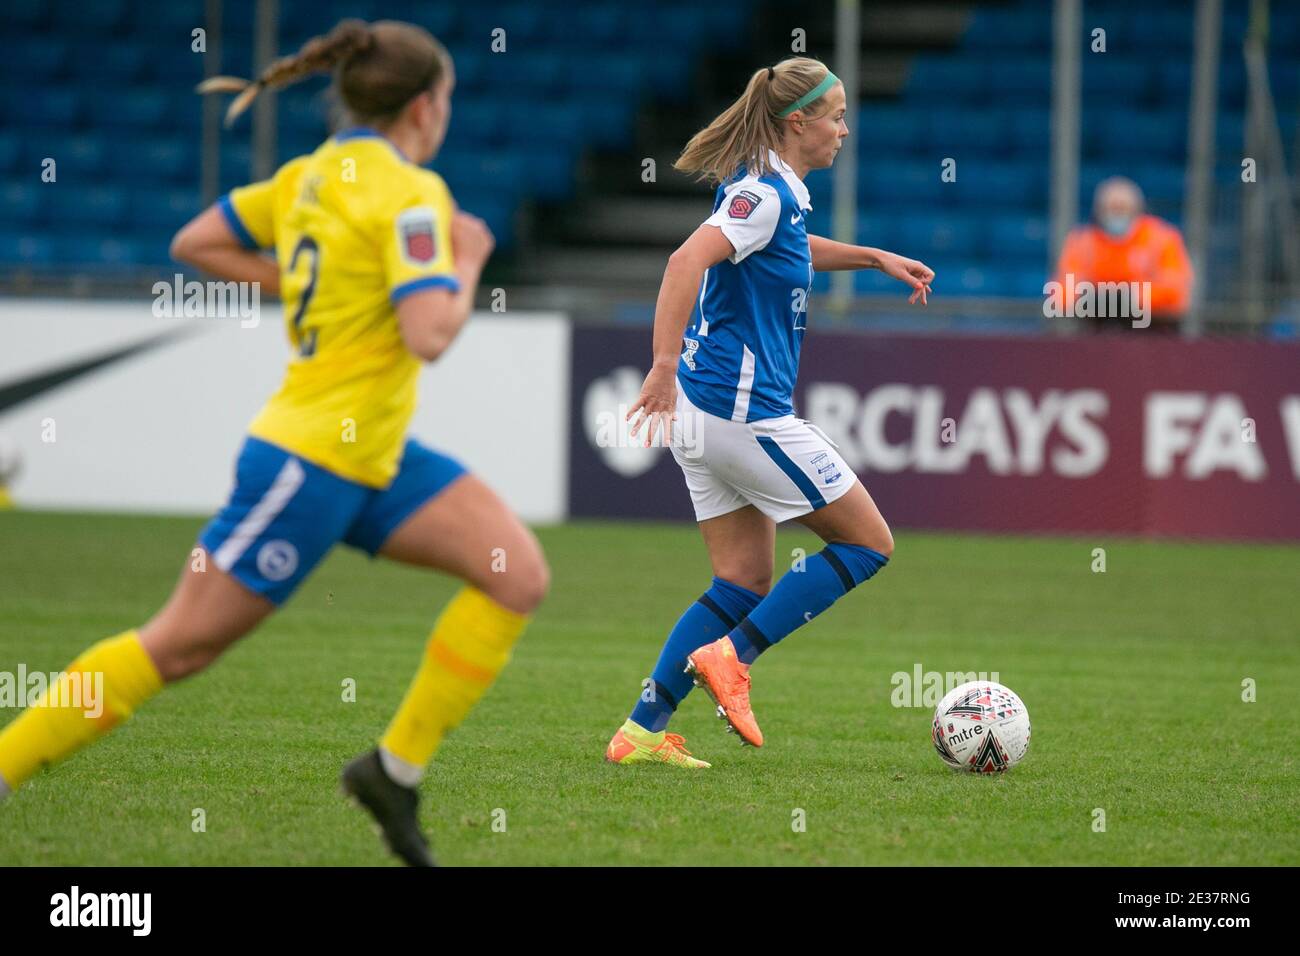 Solihull, West Midlands, UK. 17th Jan, 2021. WSL: BCFC v Brighton and Hove Albion. Blues women new signing Ruesha Littlejohn takes the ball forward on her debut for BCFC. Credit: Peter Lopeman/Alamy Live News Stock Photo